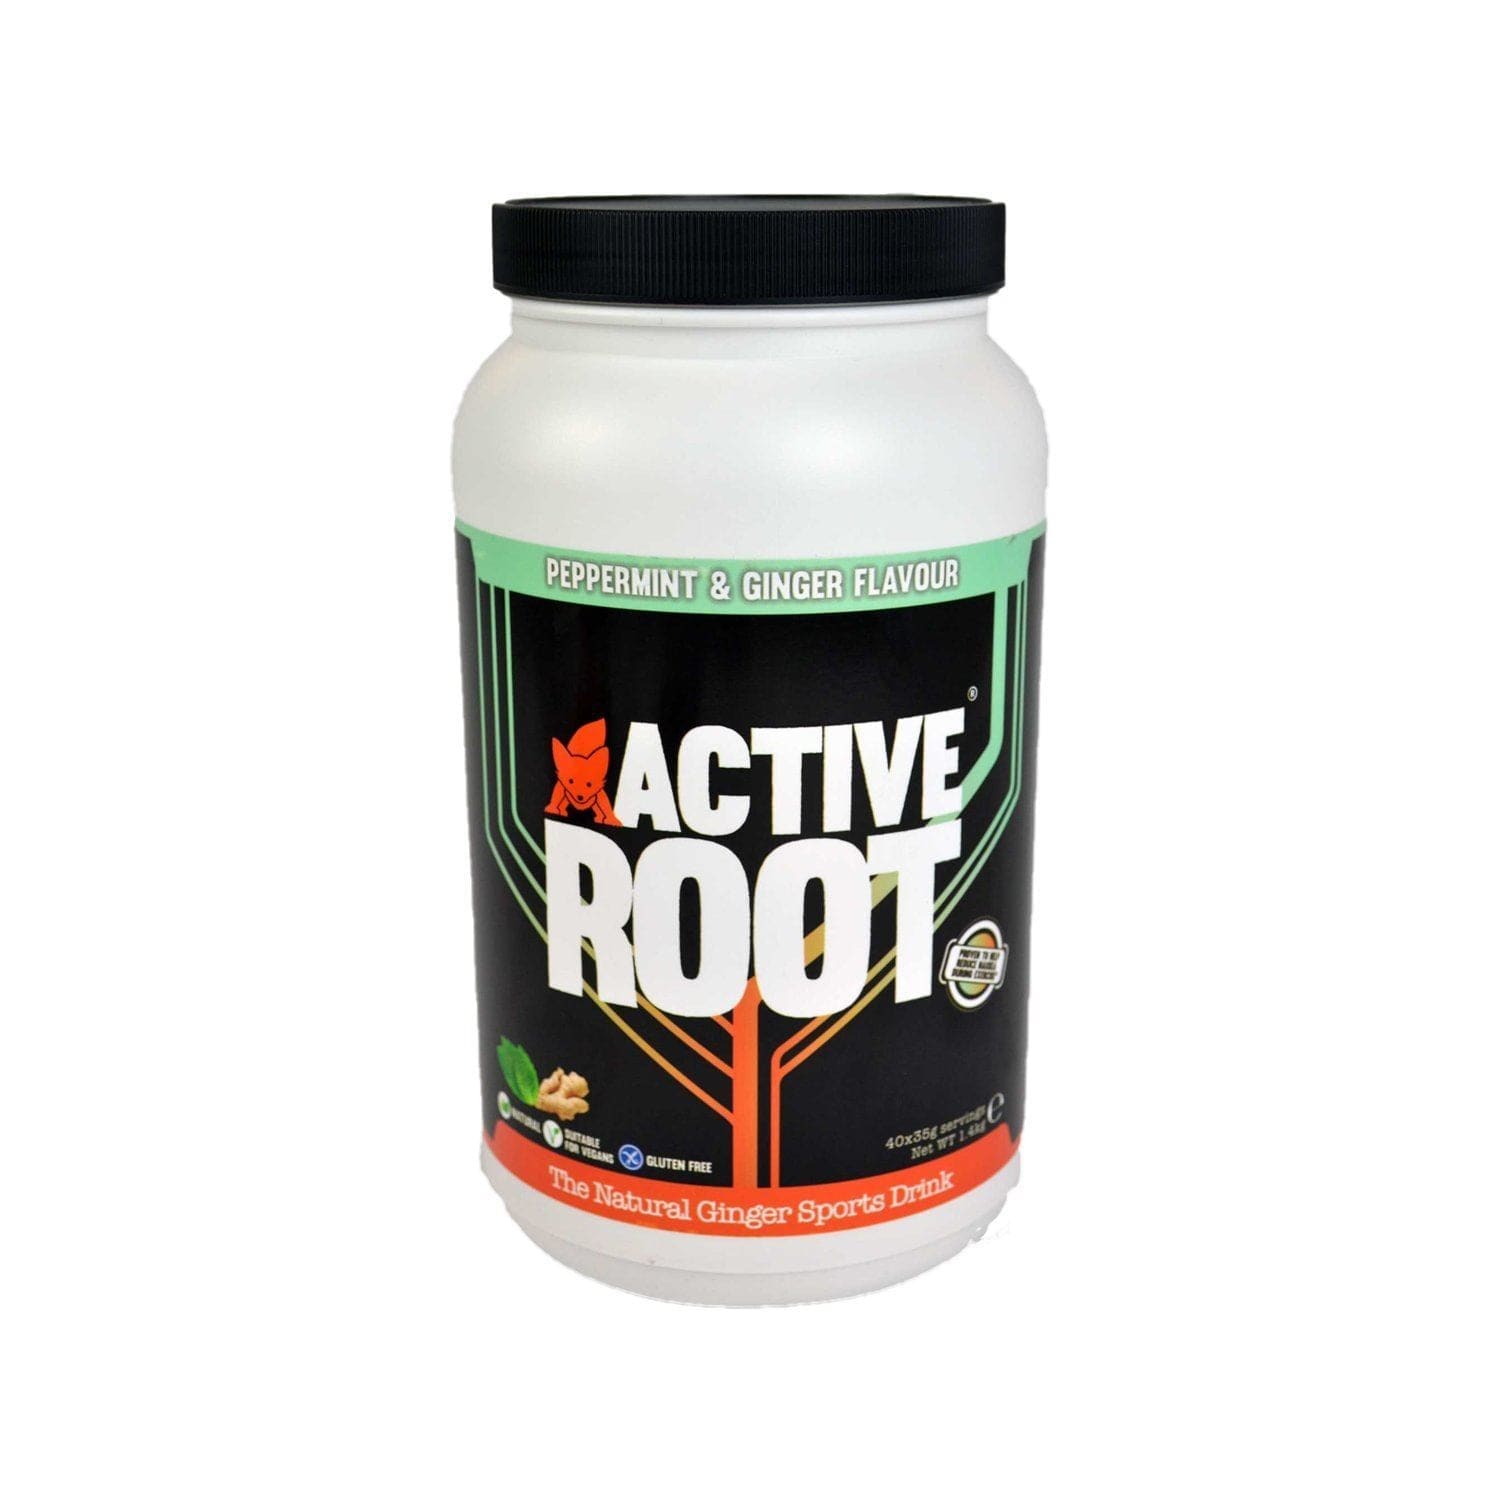 Active Root Energy Drink 40 Serving Tub (1.4kg) / Peppermint & Ginger Active Root Sports Drink Sachet XMiles